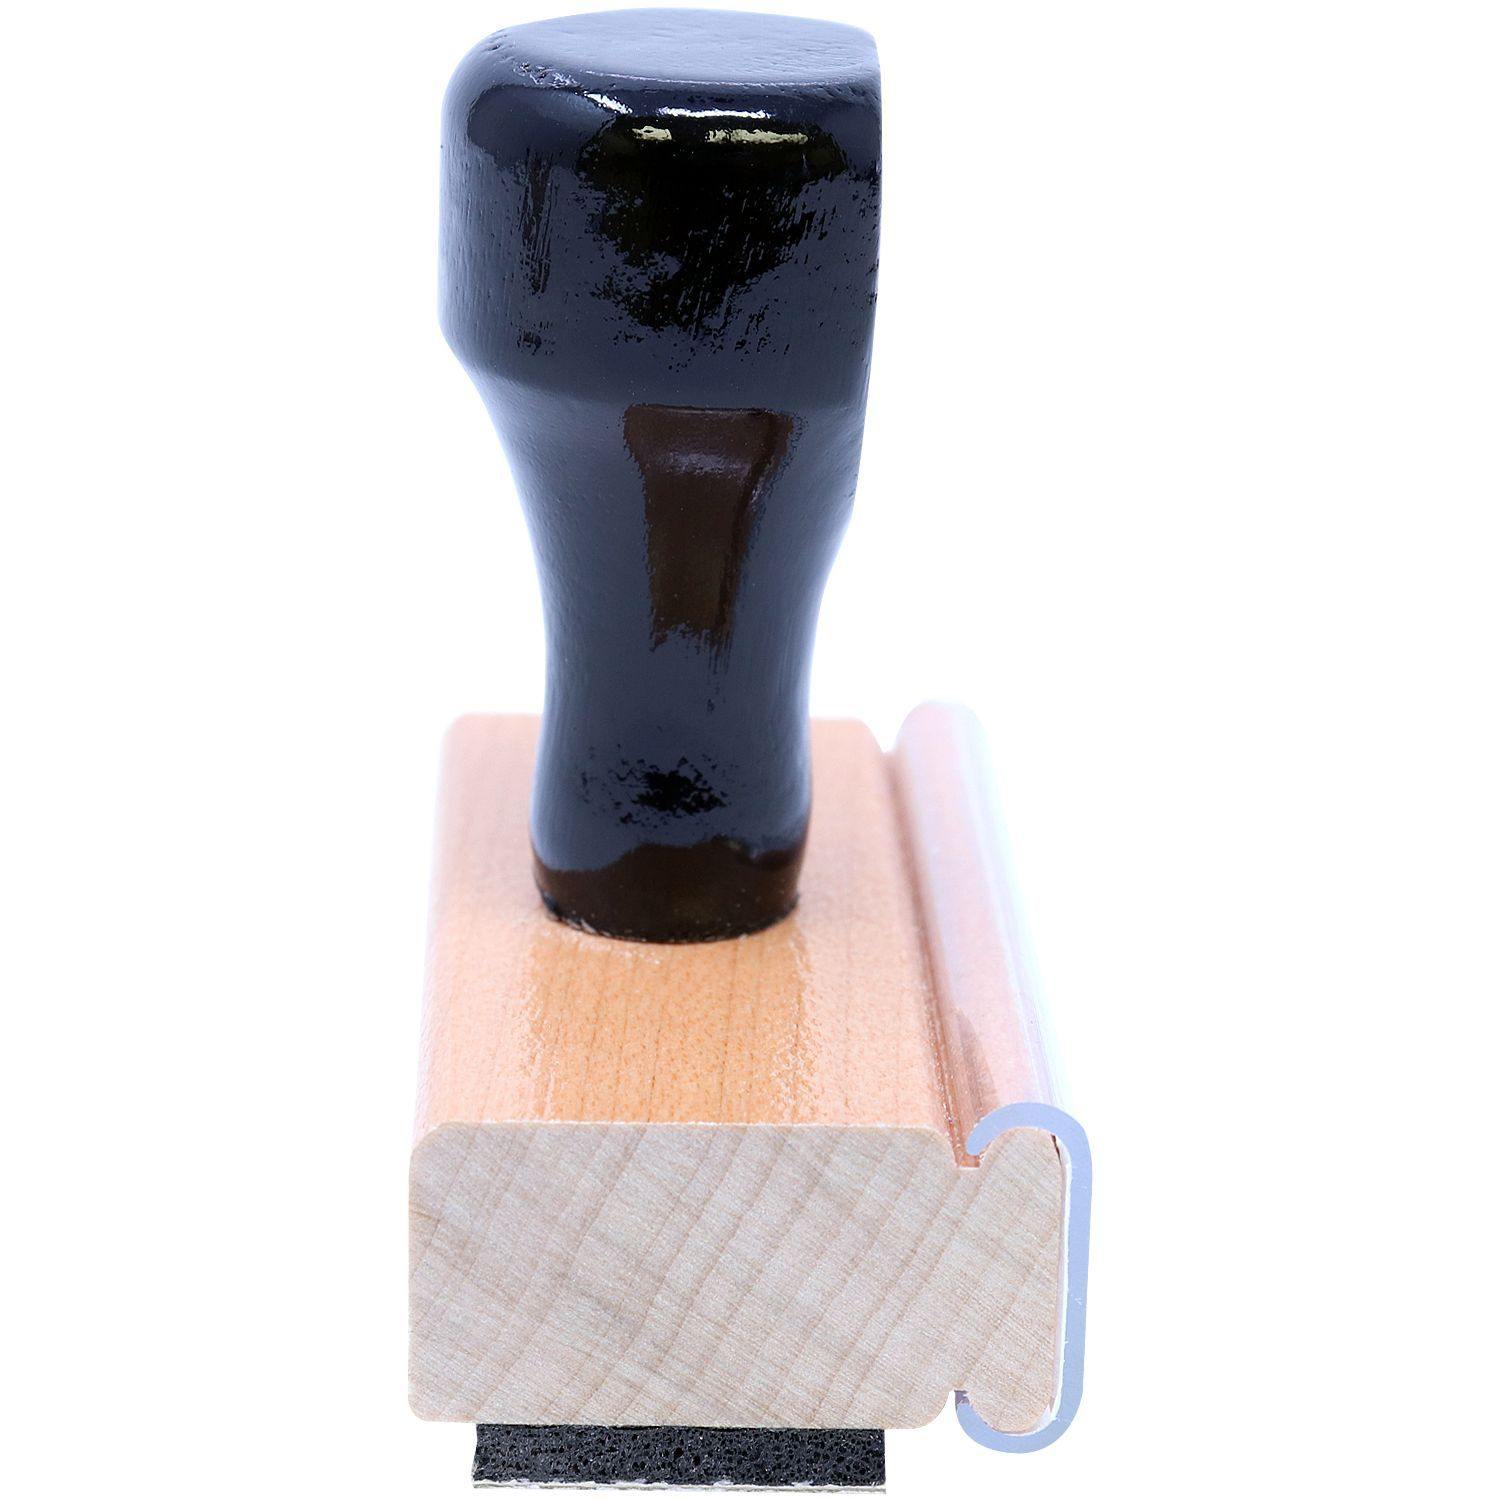 Outline Important Rubber Stamp - Engineer Seal Stamps - Brand_Acorn, Impression Size_Small, Stamp Type_Regular Stamp, Type of Use_Office